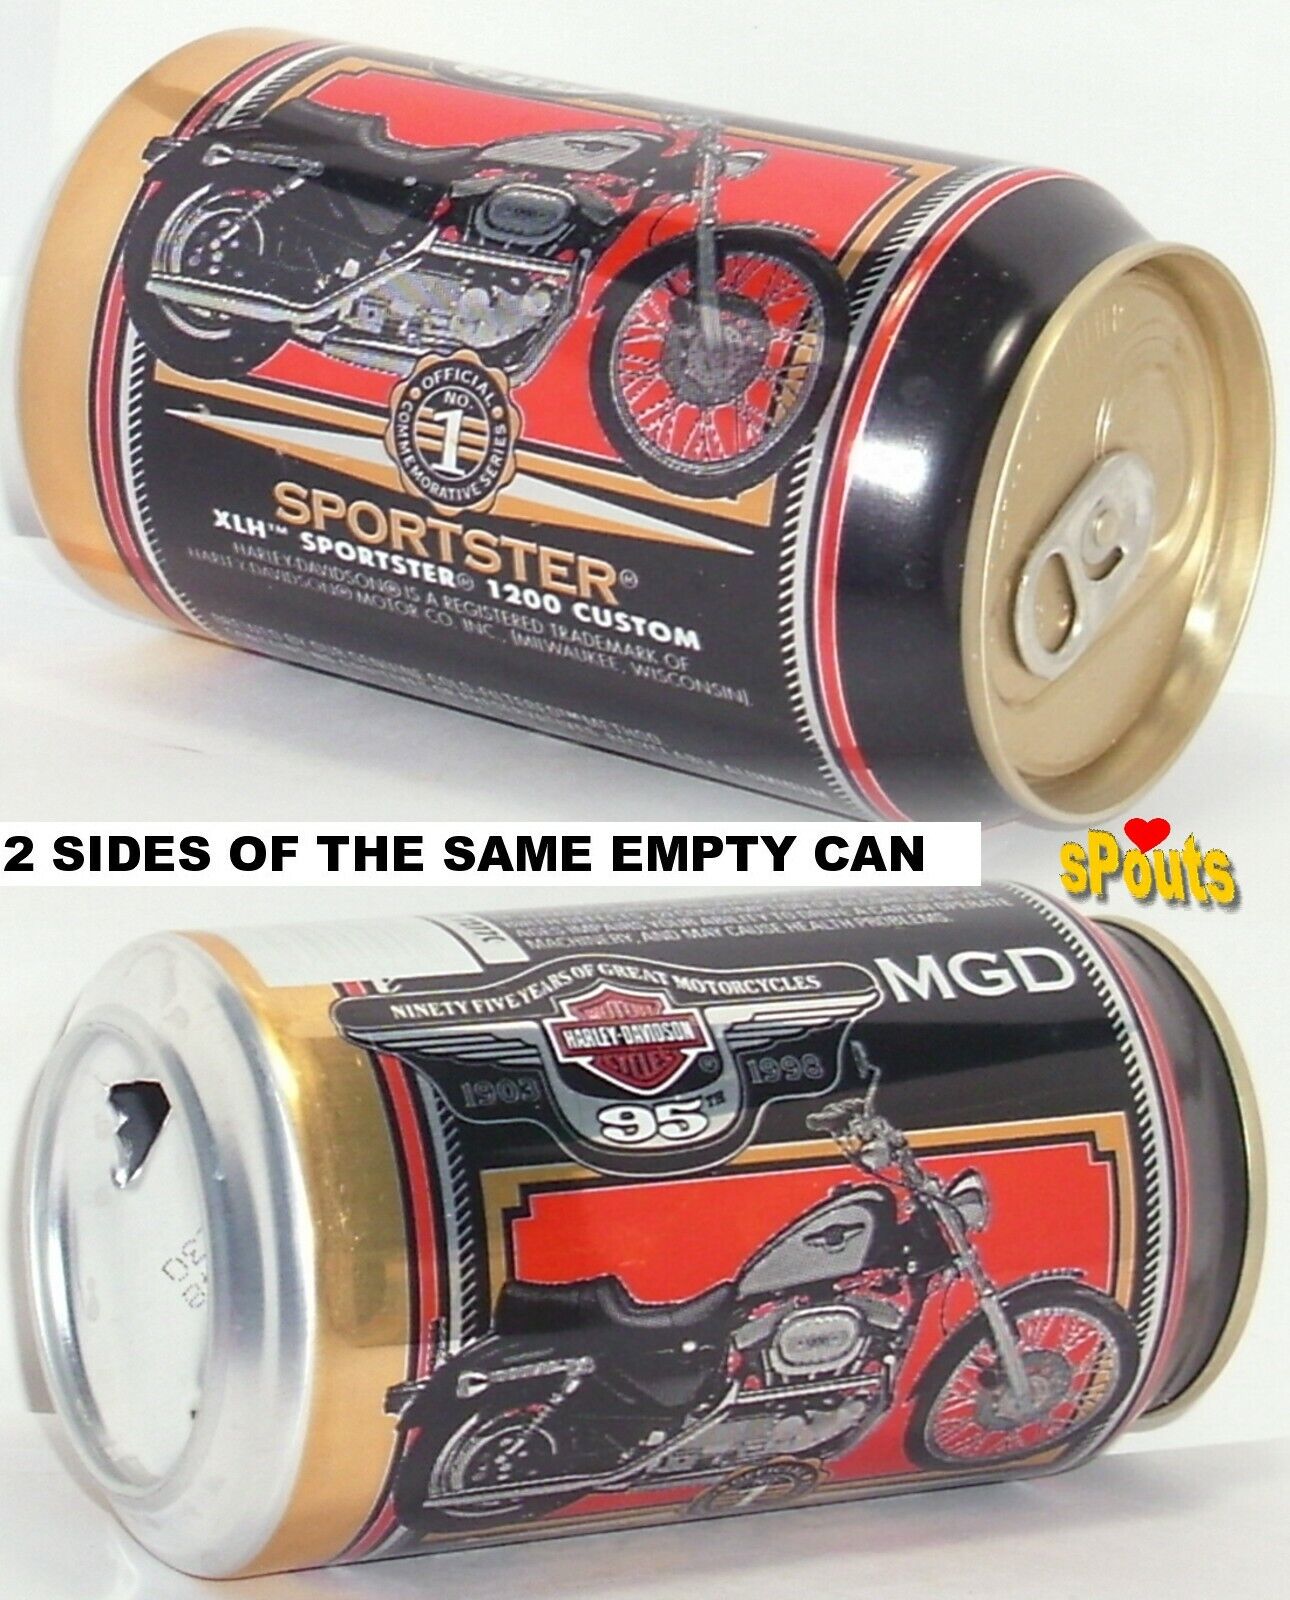 1998 SPORTSTER CUSTOM GRAPHIC HARLEY-DAVIDSON MOTOR CYCLE 95yrs. MILLER BEER CAN